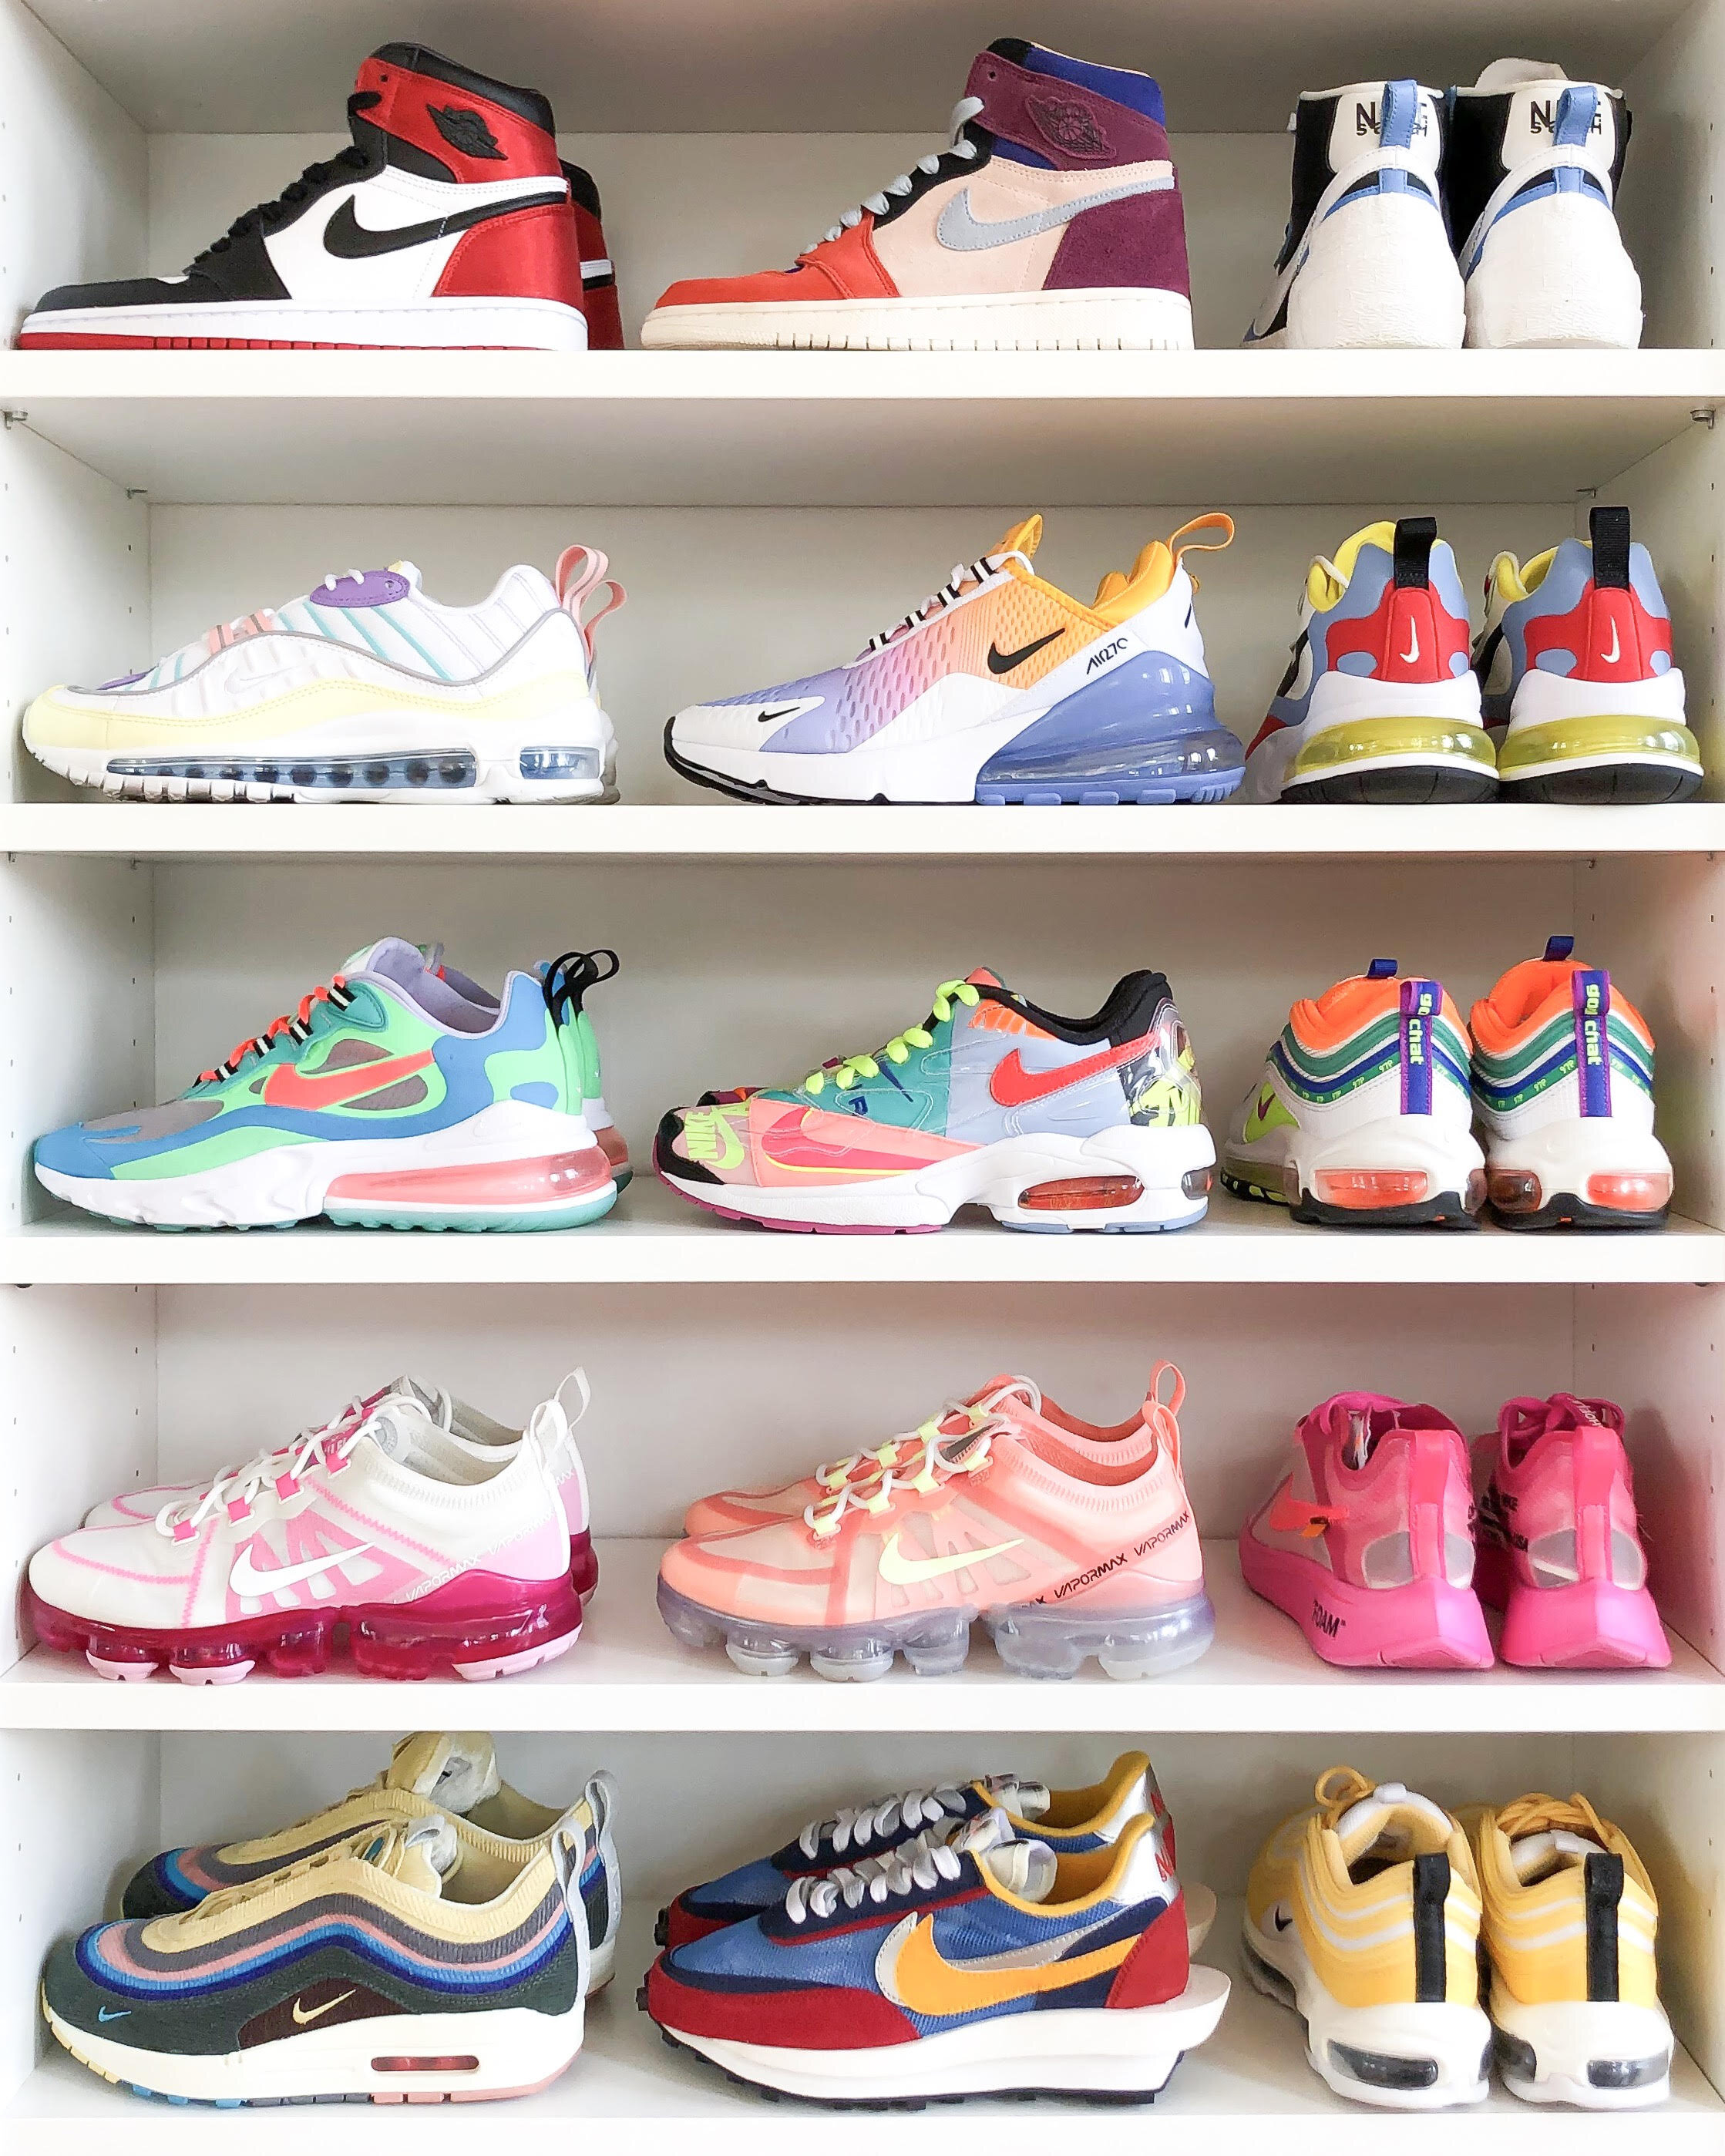 Sally Torabi Has a Closet Full of Heat and Color CNK (ChicksNKicks)